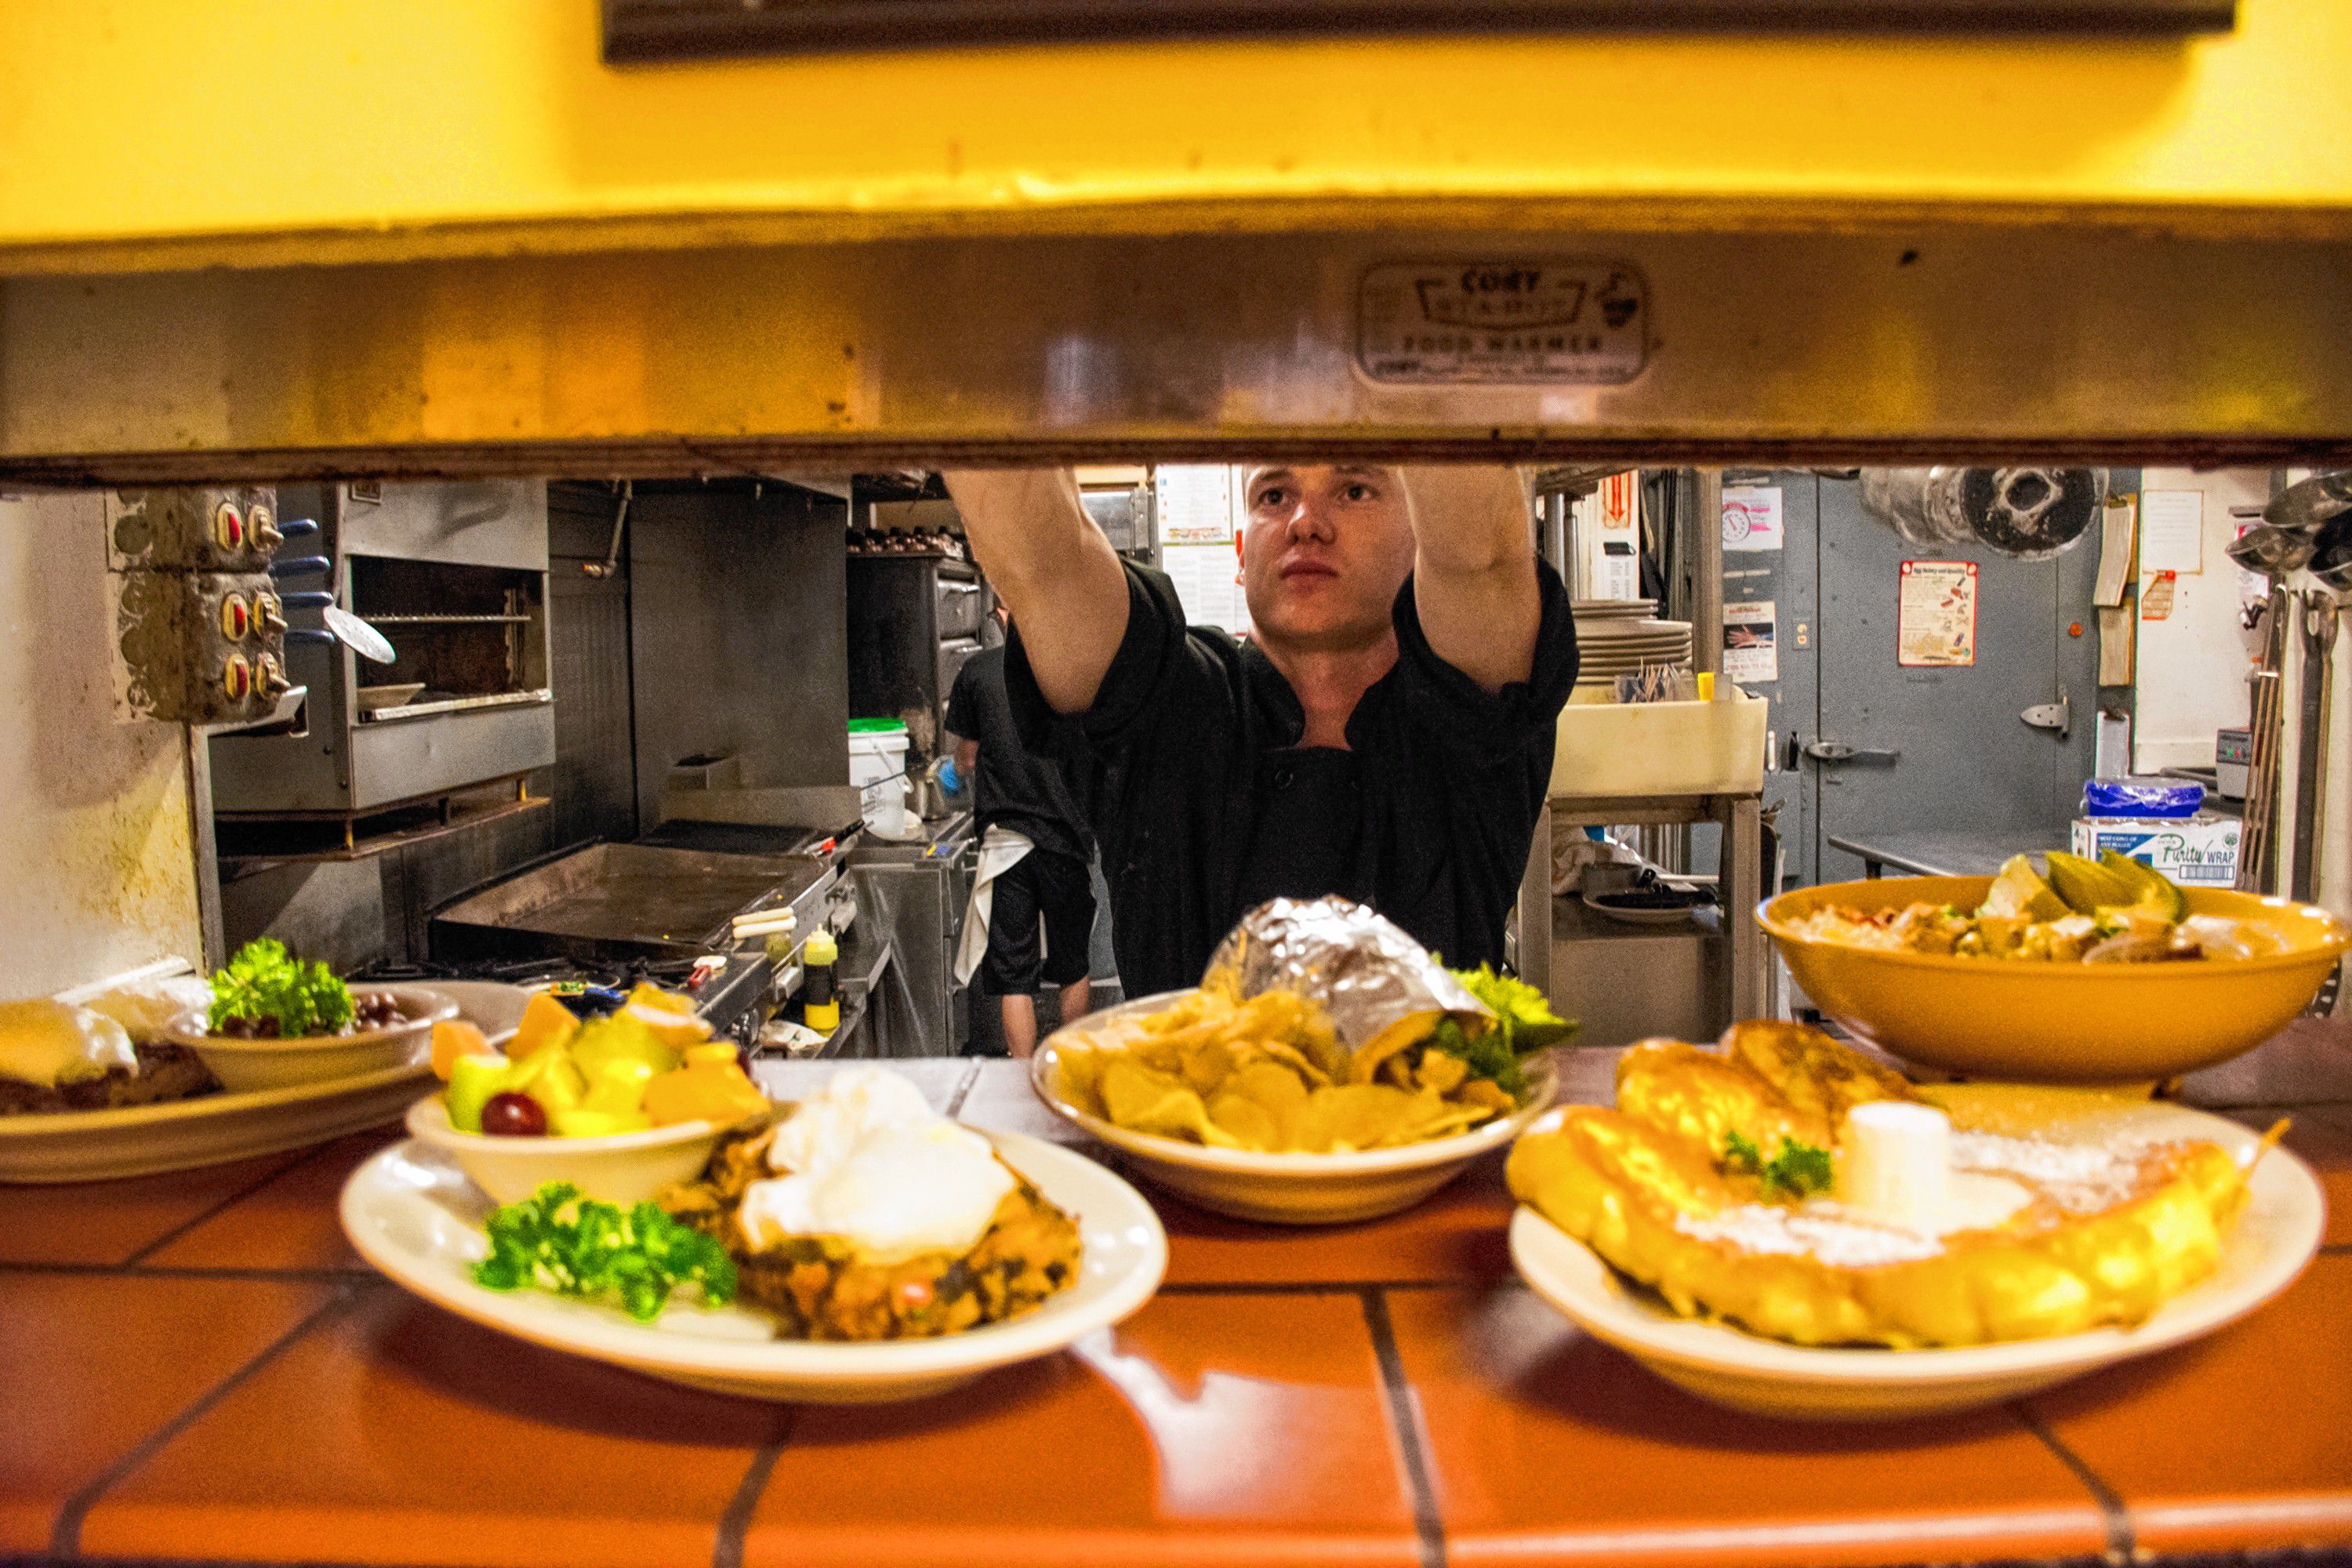 Six months into his job as chef at Lou's Restaurant and Bakery, Zach Plante Haverhill, NH plates up the last meals of the day. The kitchen closes at 3 p.m. but the bakery stays open until 5 p.m. Nancy Nutile-McMenemy photograph.